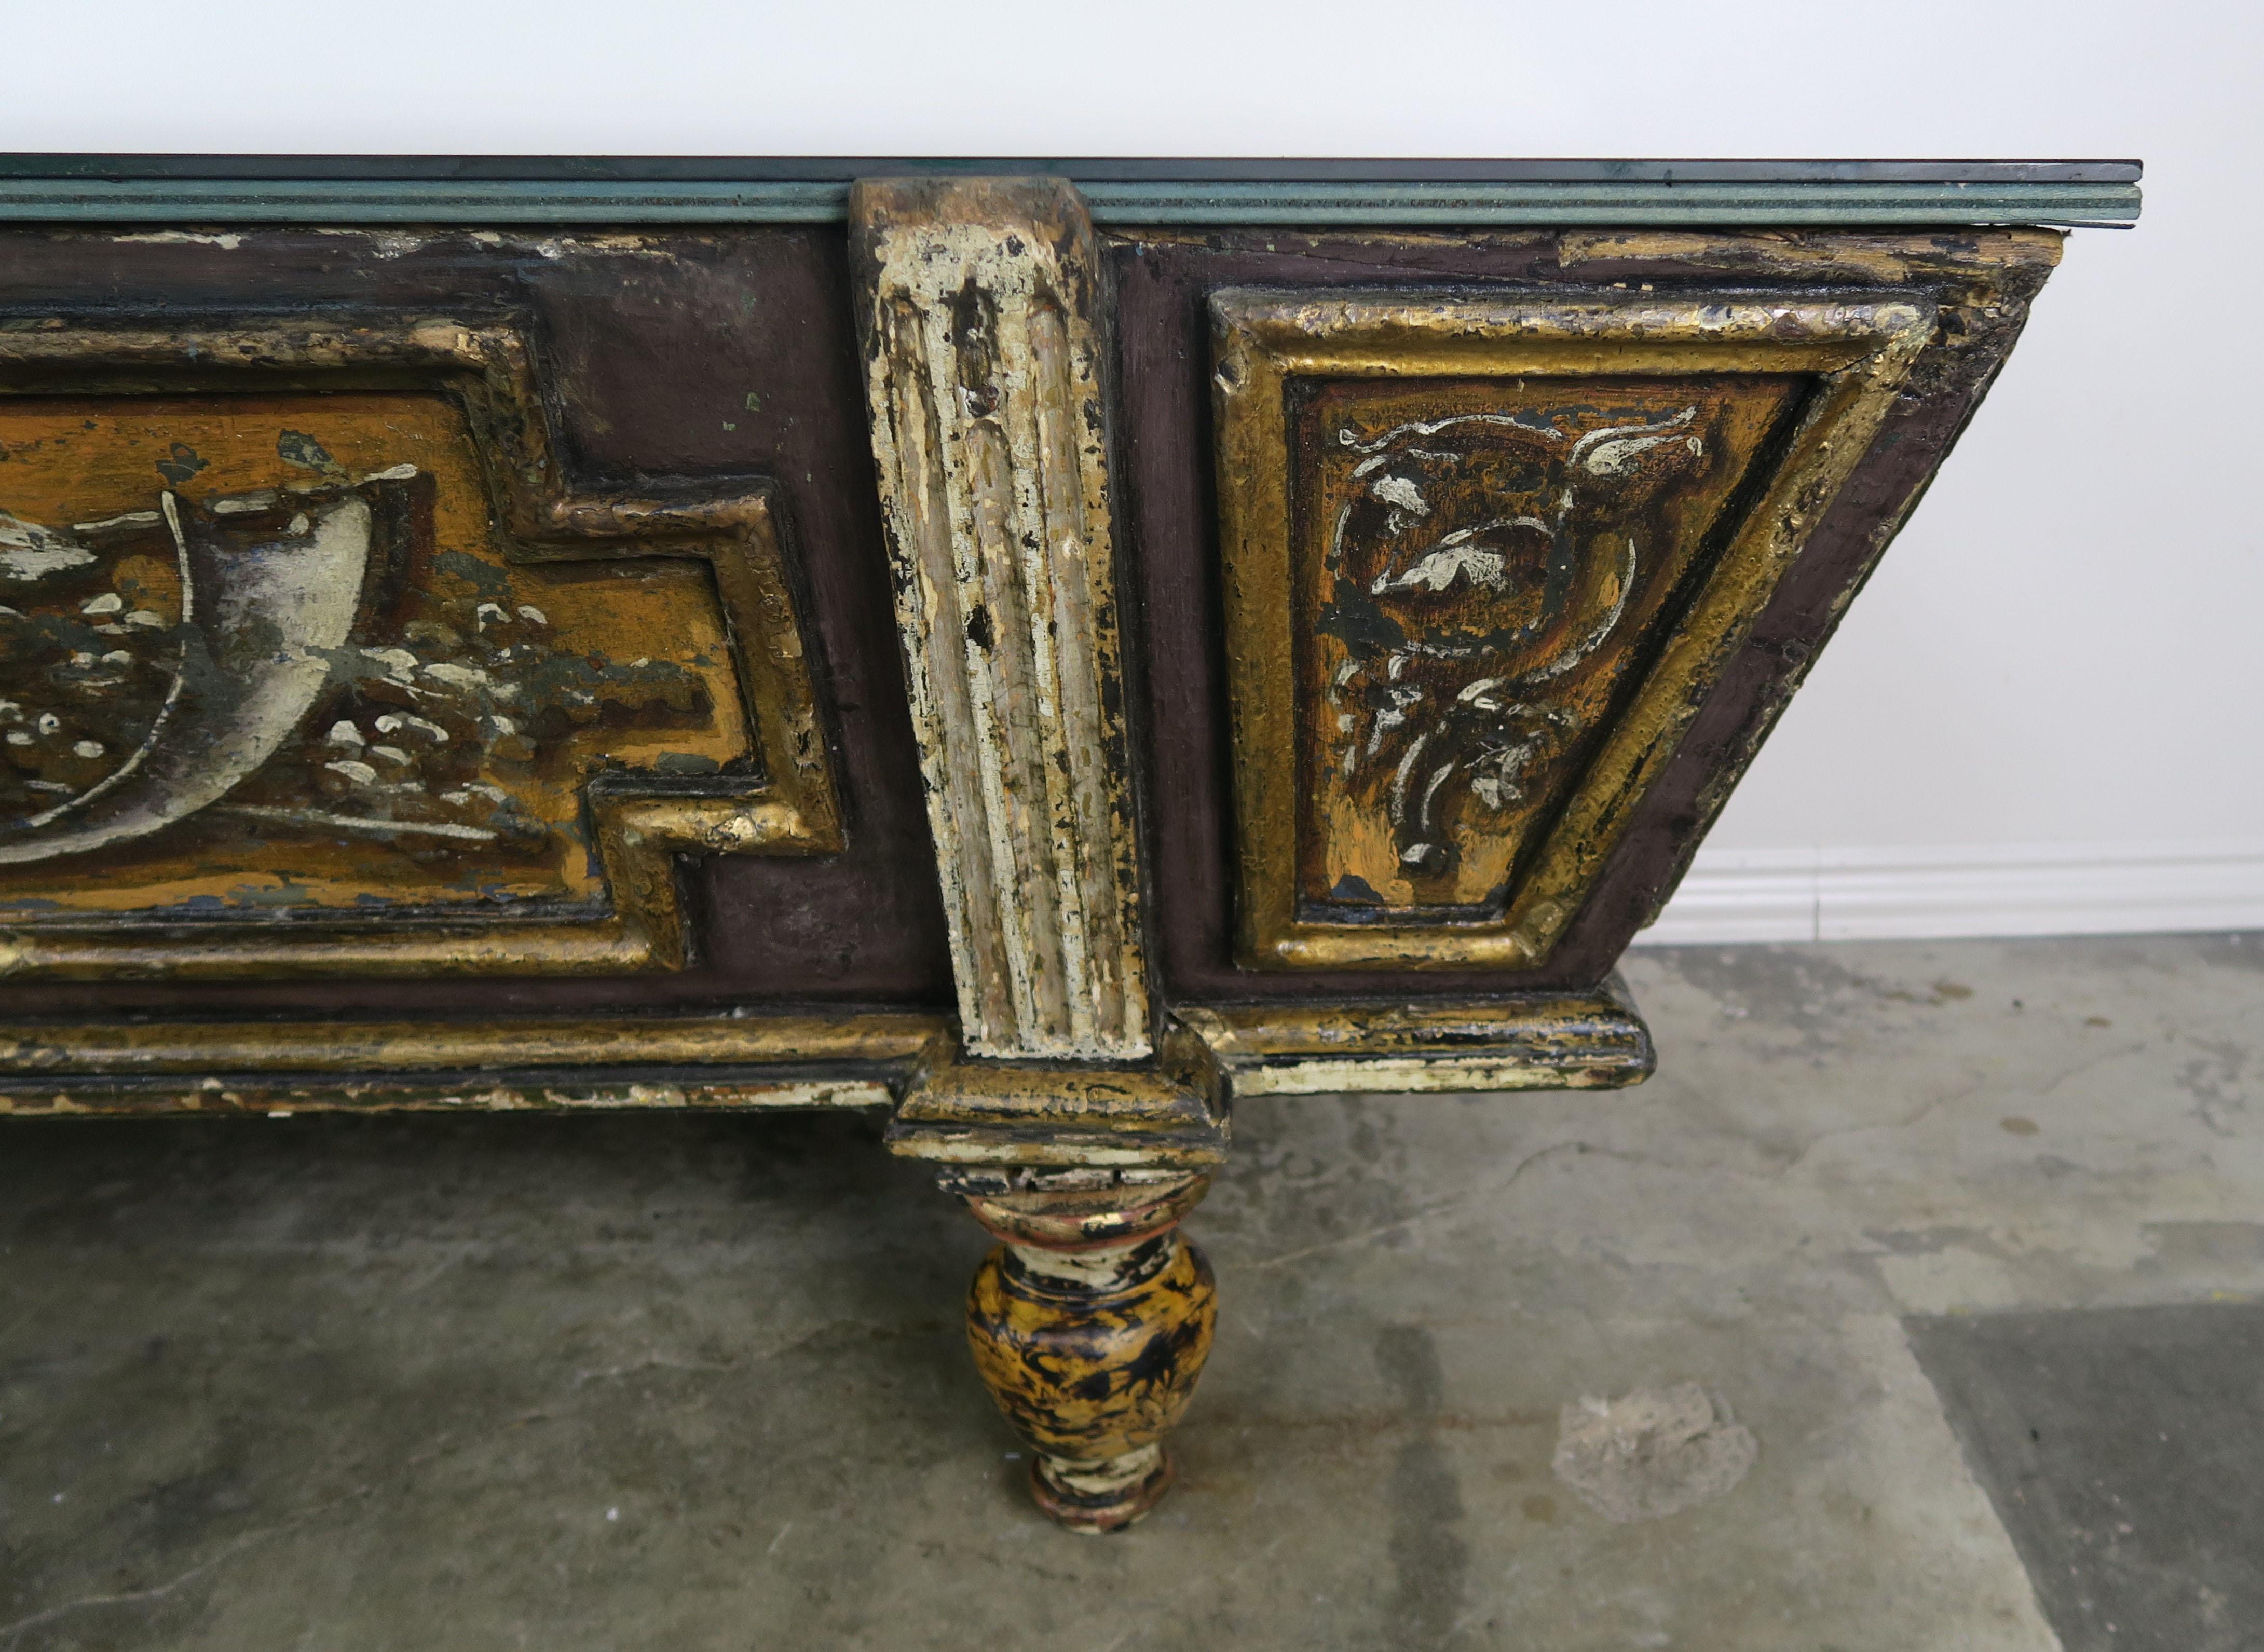 19th century Italian painted cassone that has an antiqued mirrored top. The top opens to provide great storage inside. The original paint depicts winged figures, flowers, and architecture throughout.